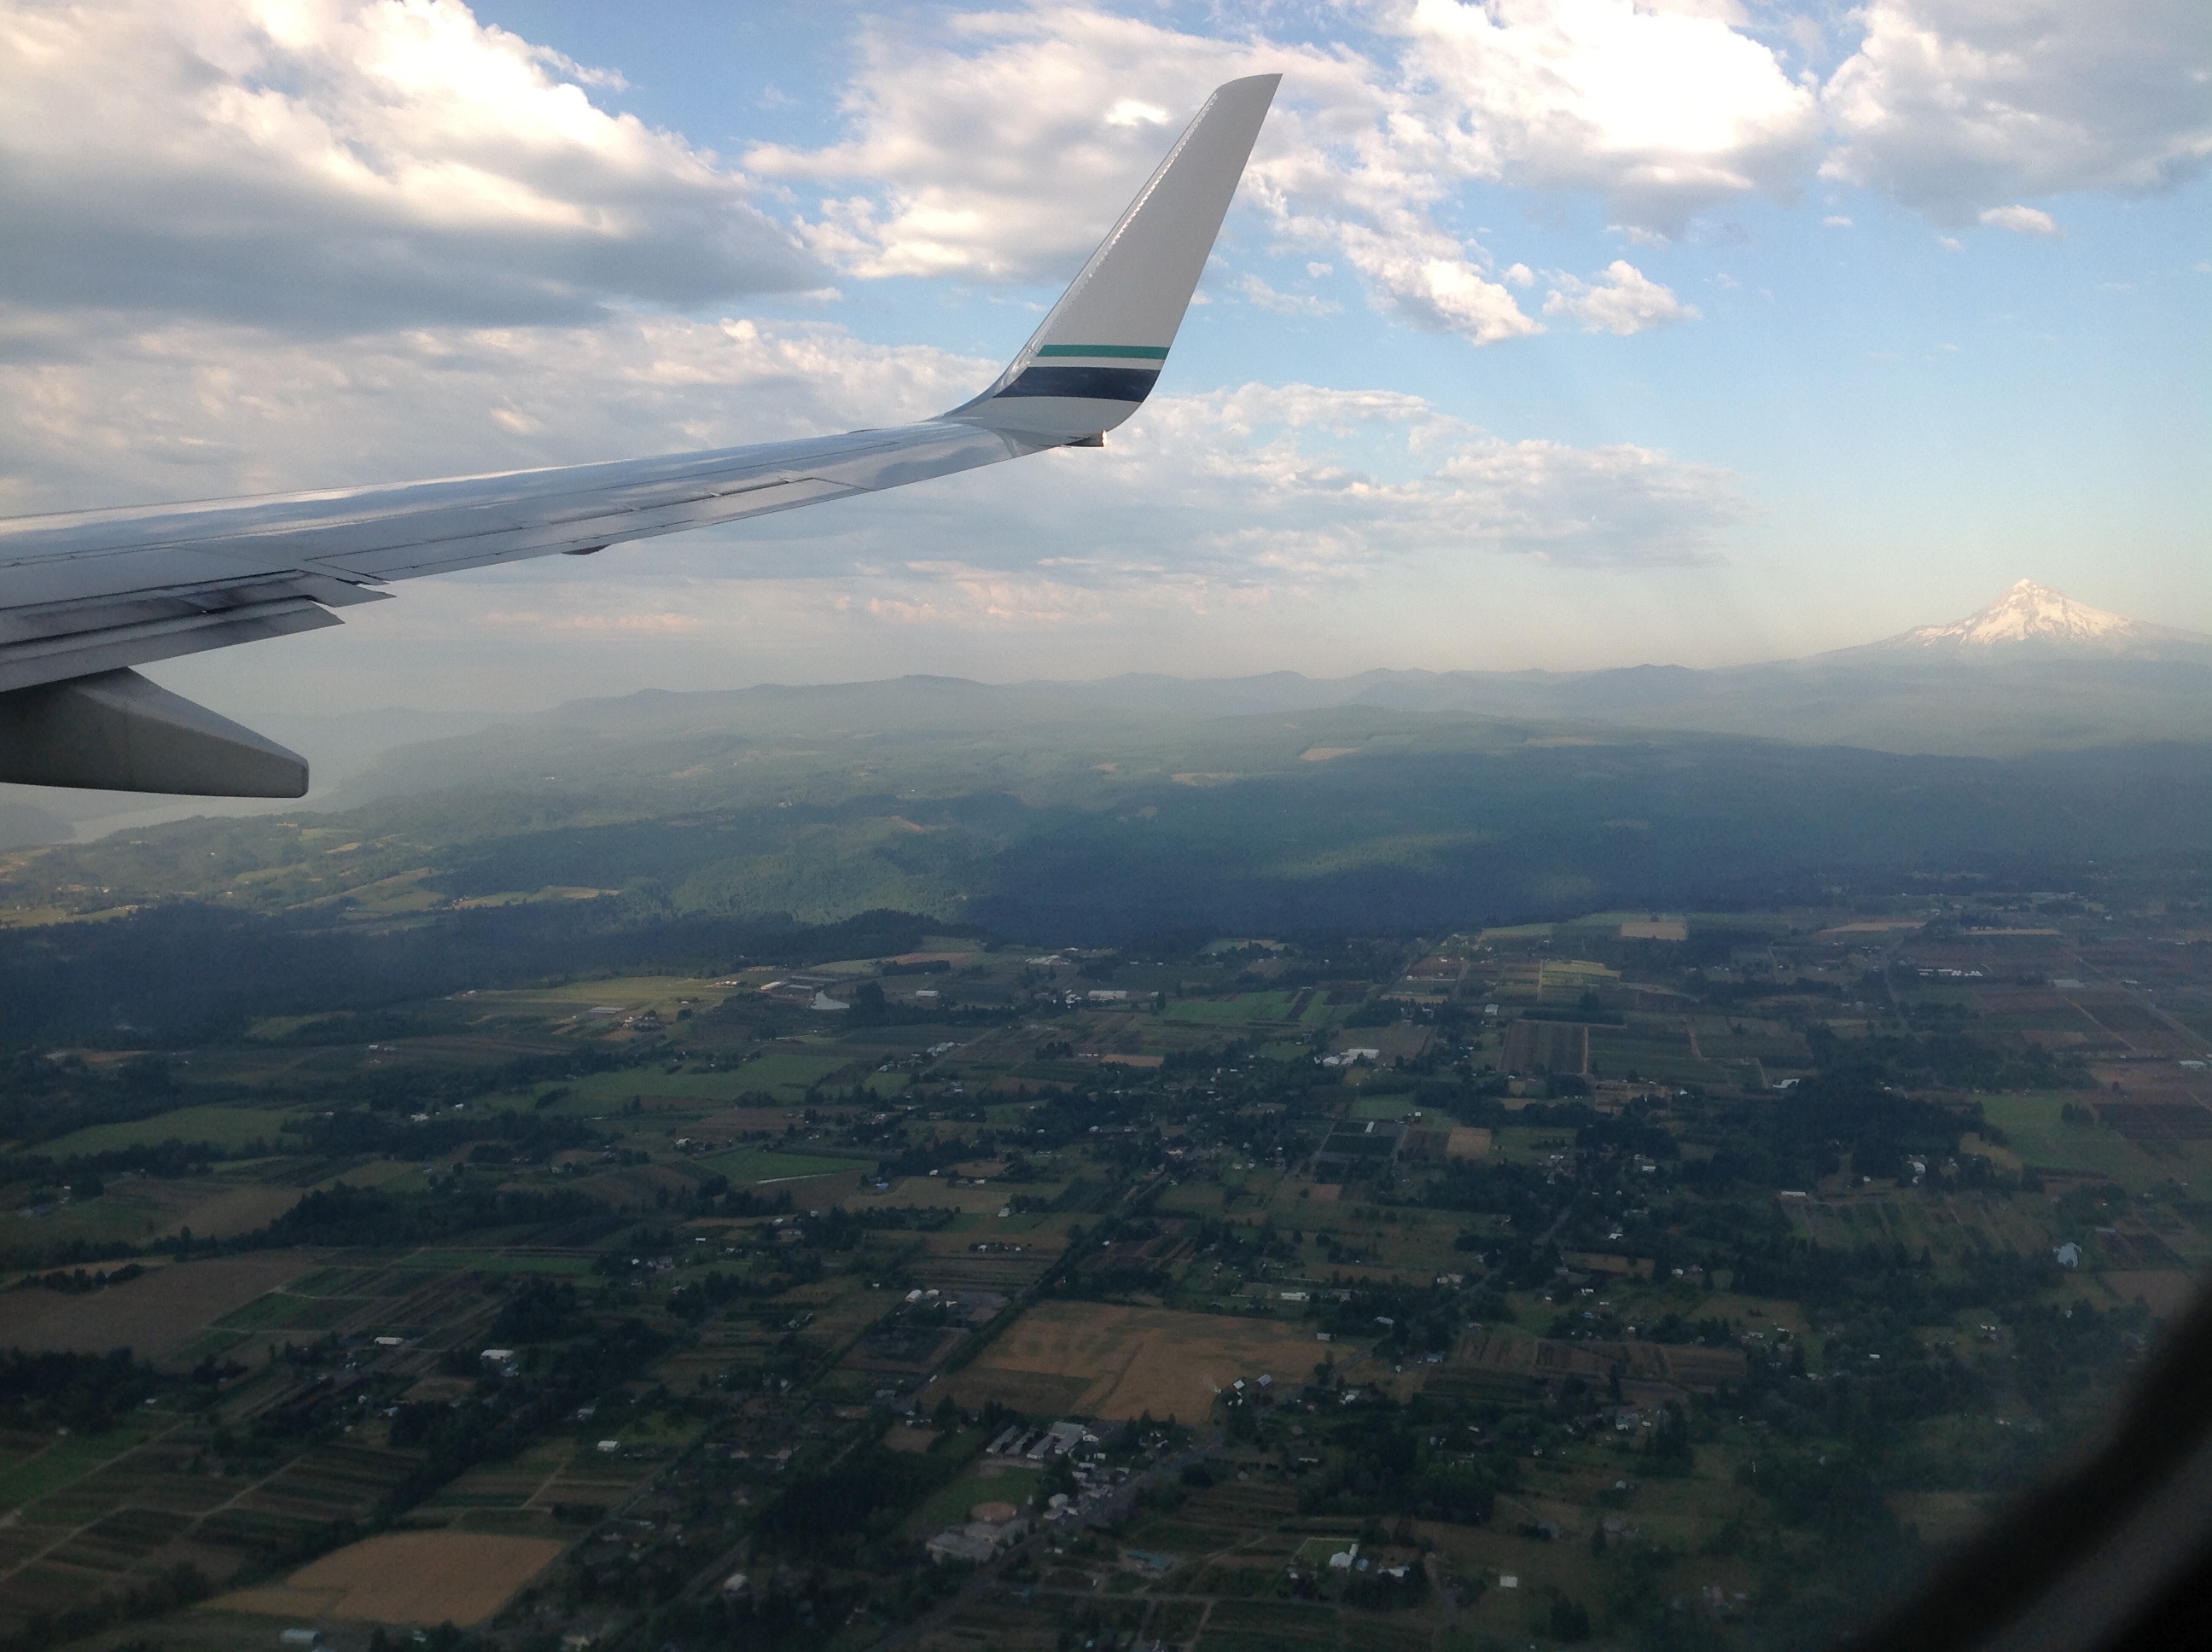 Approaching PDX (Columbia River on the left, Mount Hood on the right)